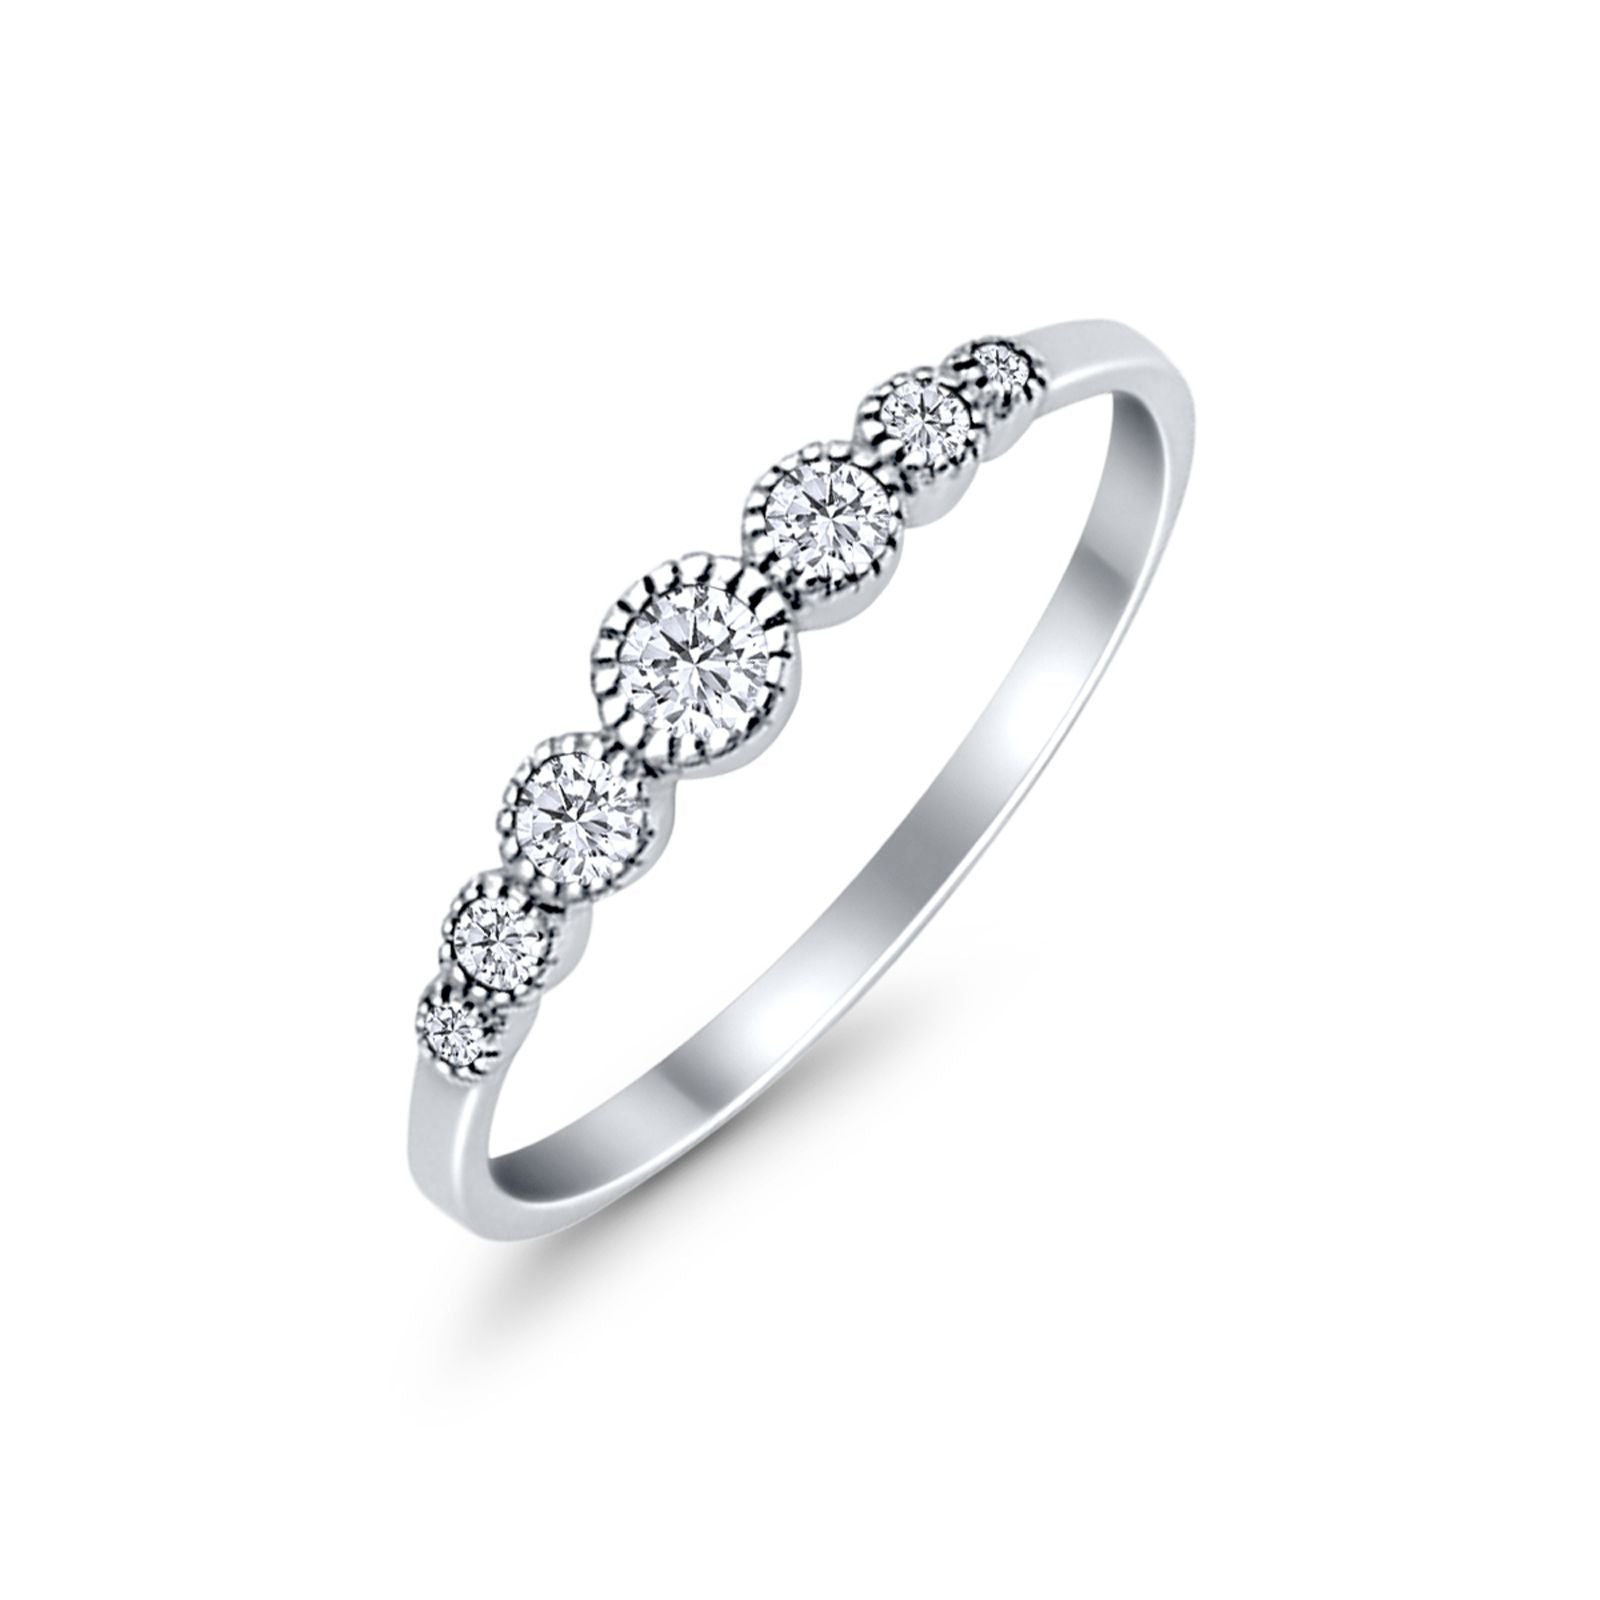 Half Eternity Petite Dainty Wedding Band Ring Simulated CZ 925 Sterling Silver